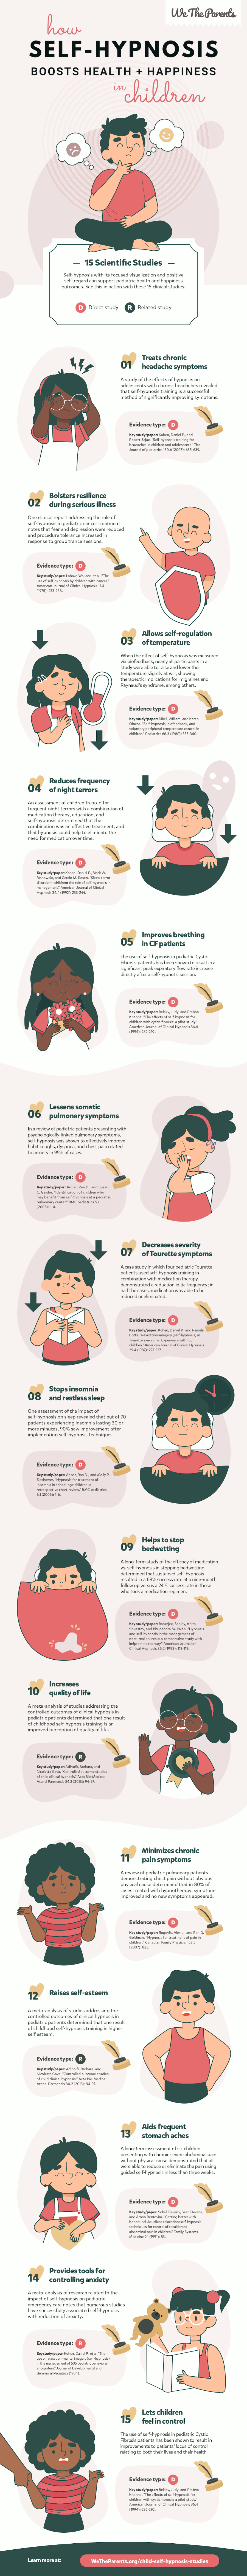 Infographic: Self-hypnosis benefits for children